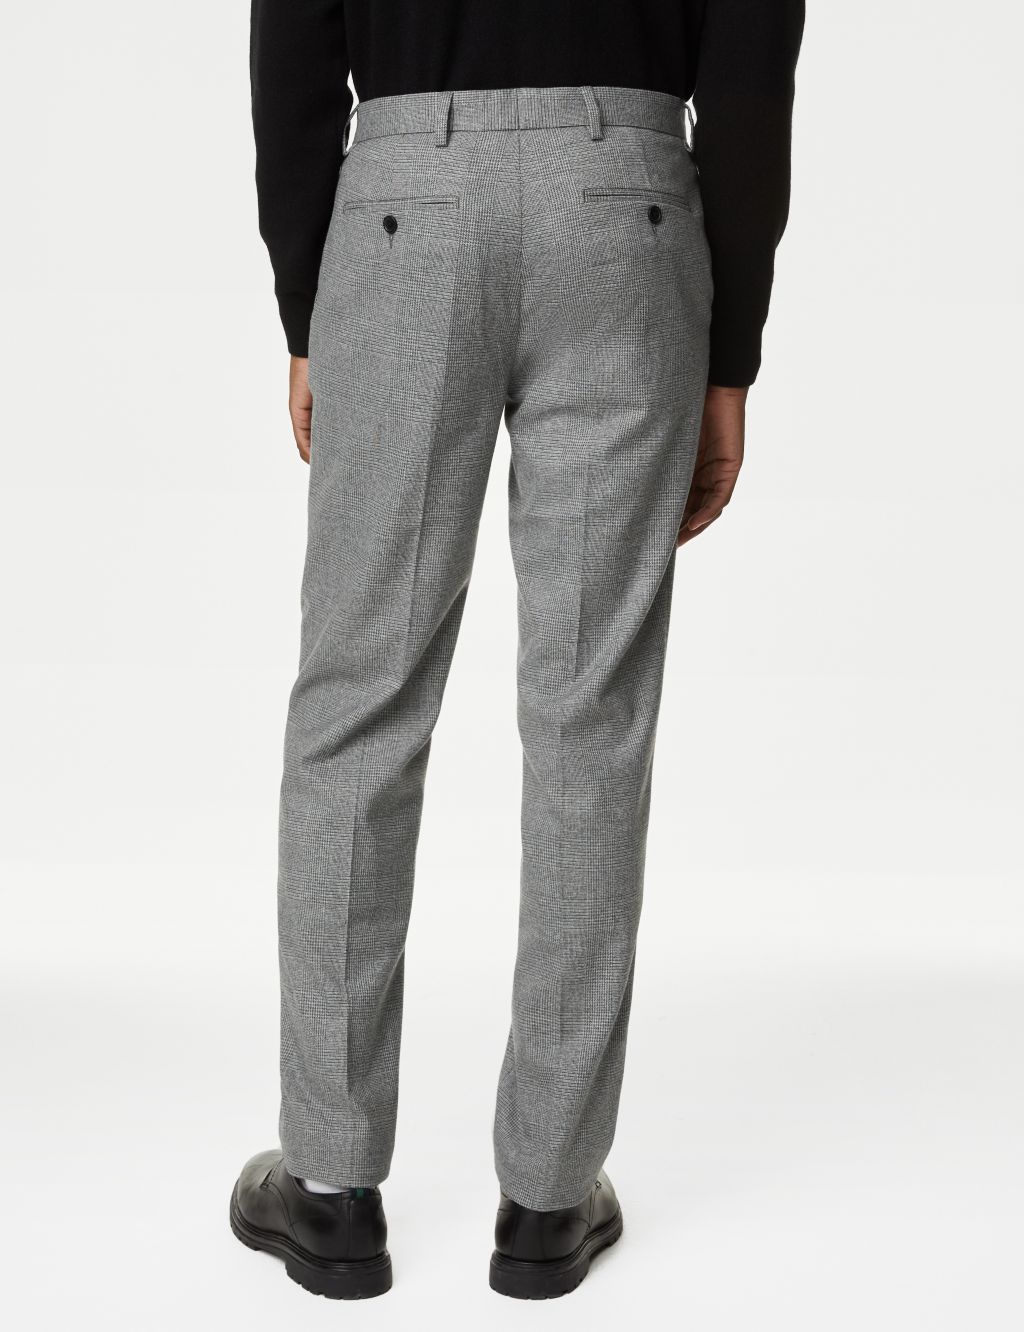 Tailored Fit Check Stretch Trousers image 5